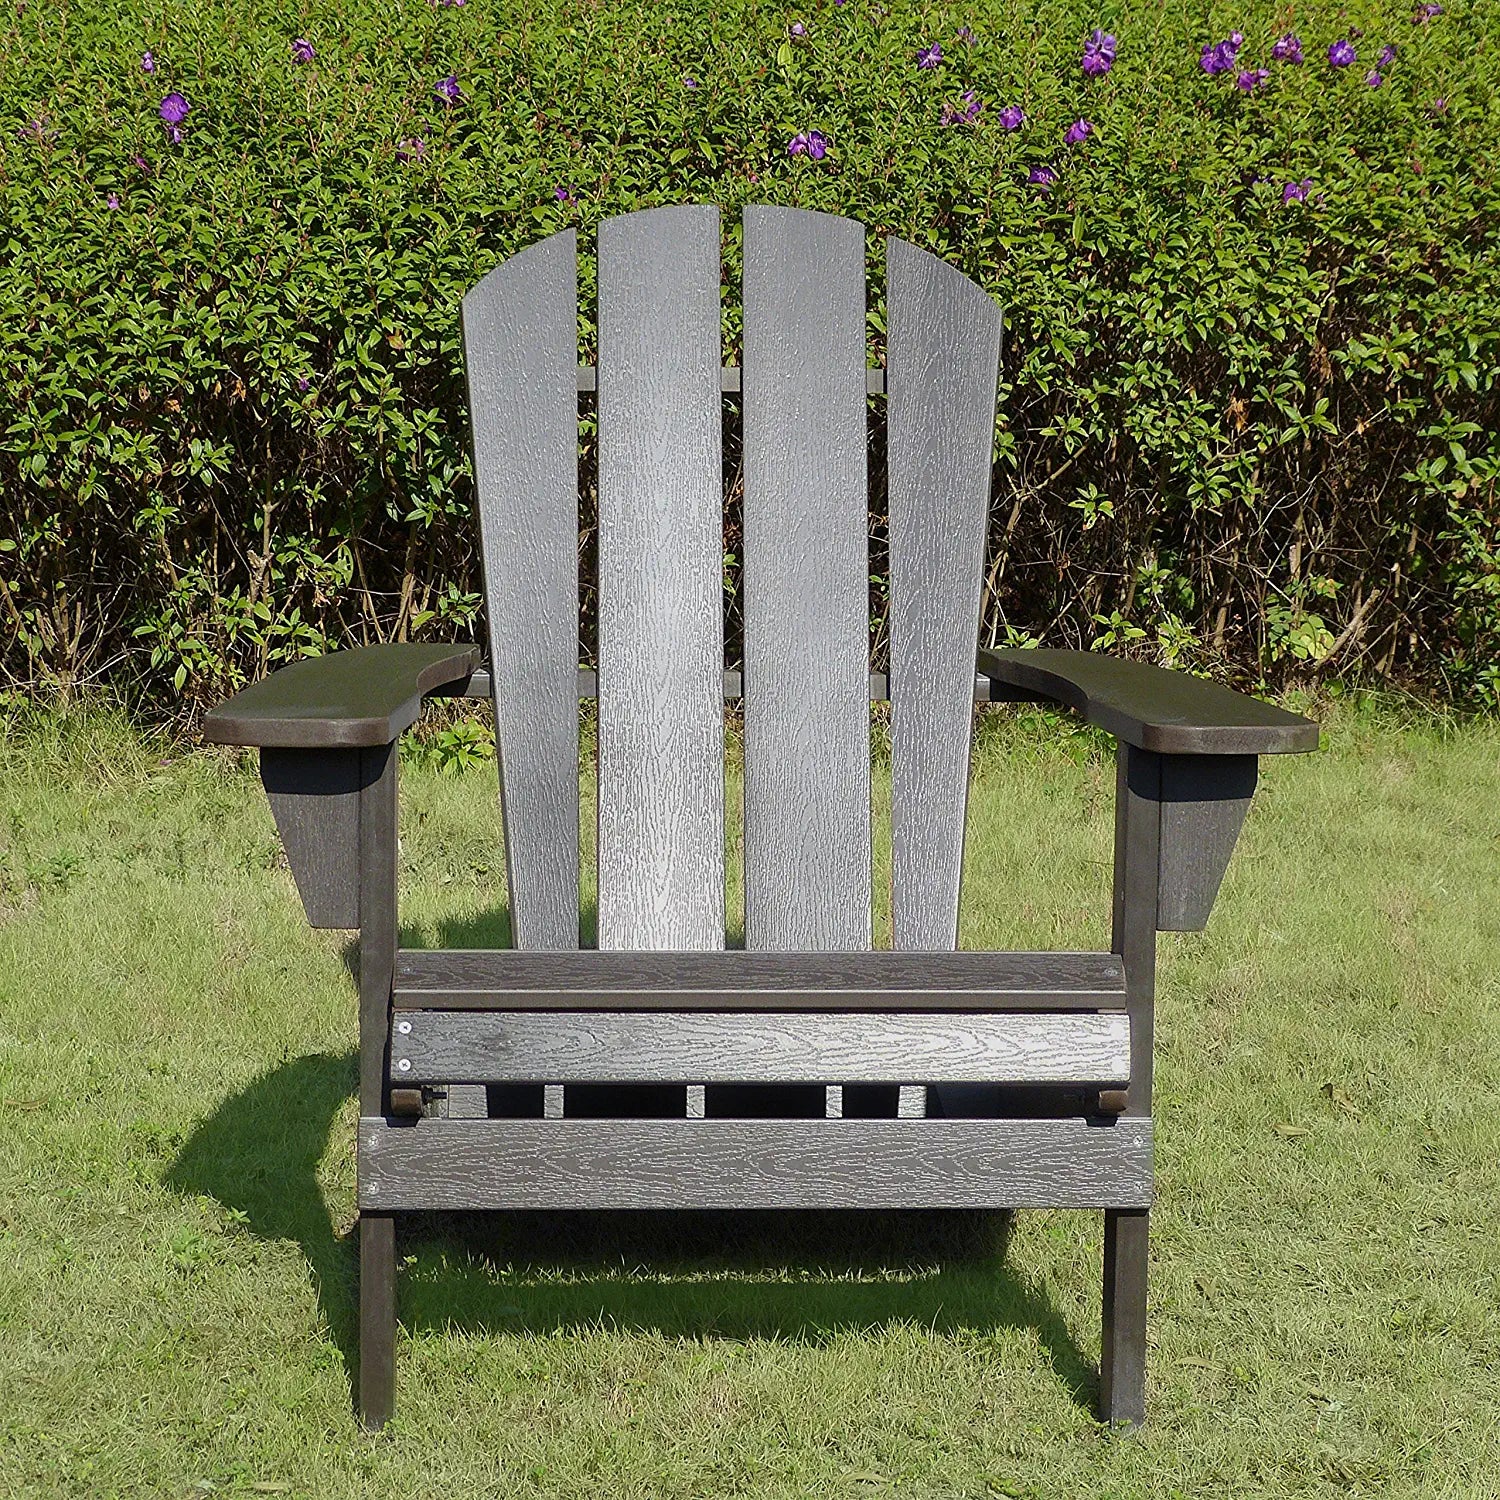 Northbeam Faux Wood Foldable Relaxed Adirondack Chair, Outdoor, Garden, Lawn, Deck Chair, Espresso